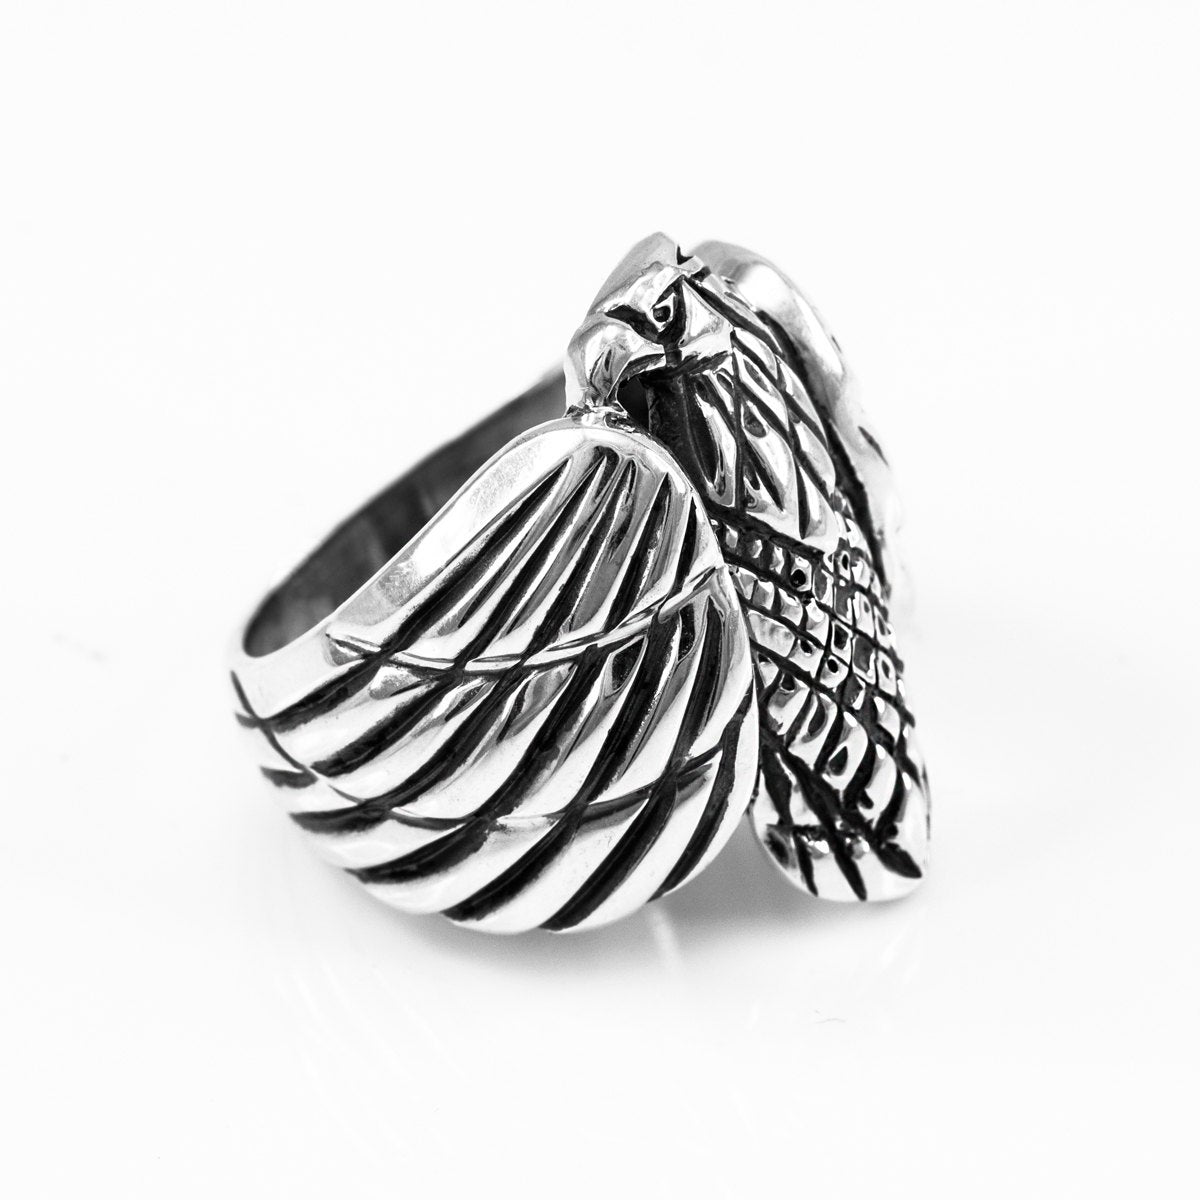 Silver Eagle Ring - Solid Sterling Silver American Eagle Men's Ring Karma Blingz